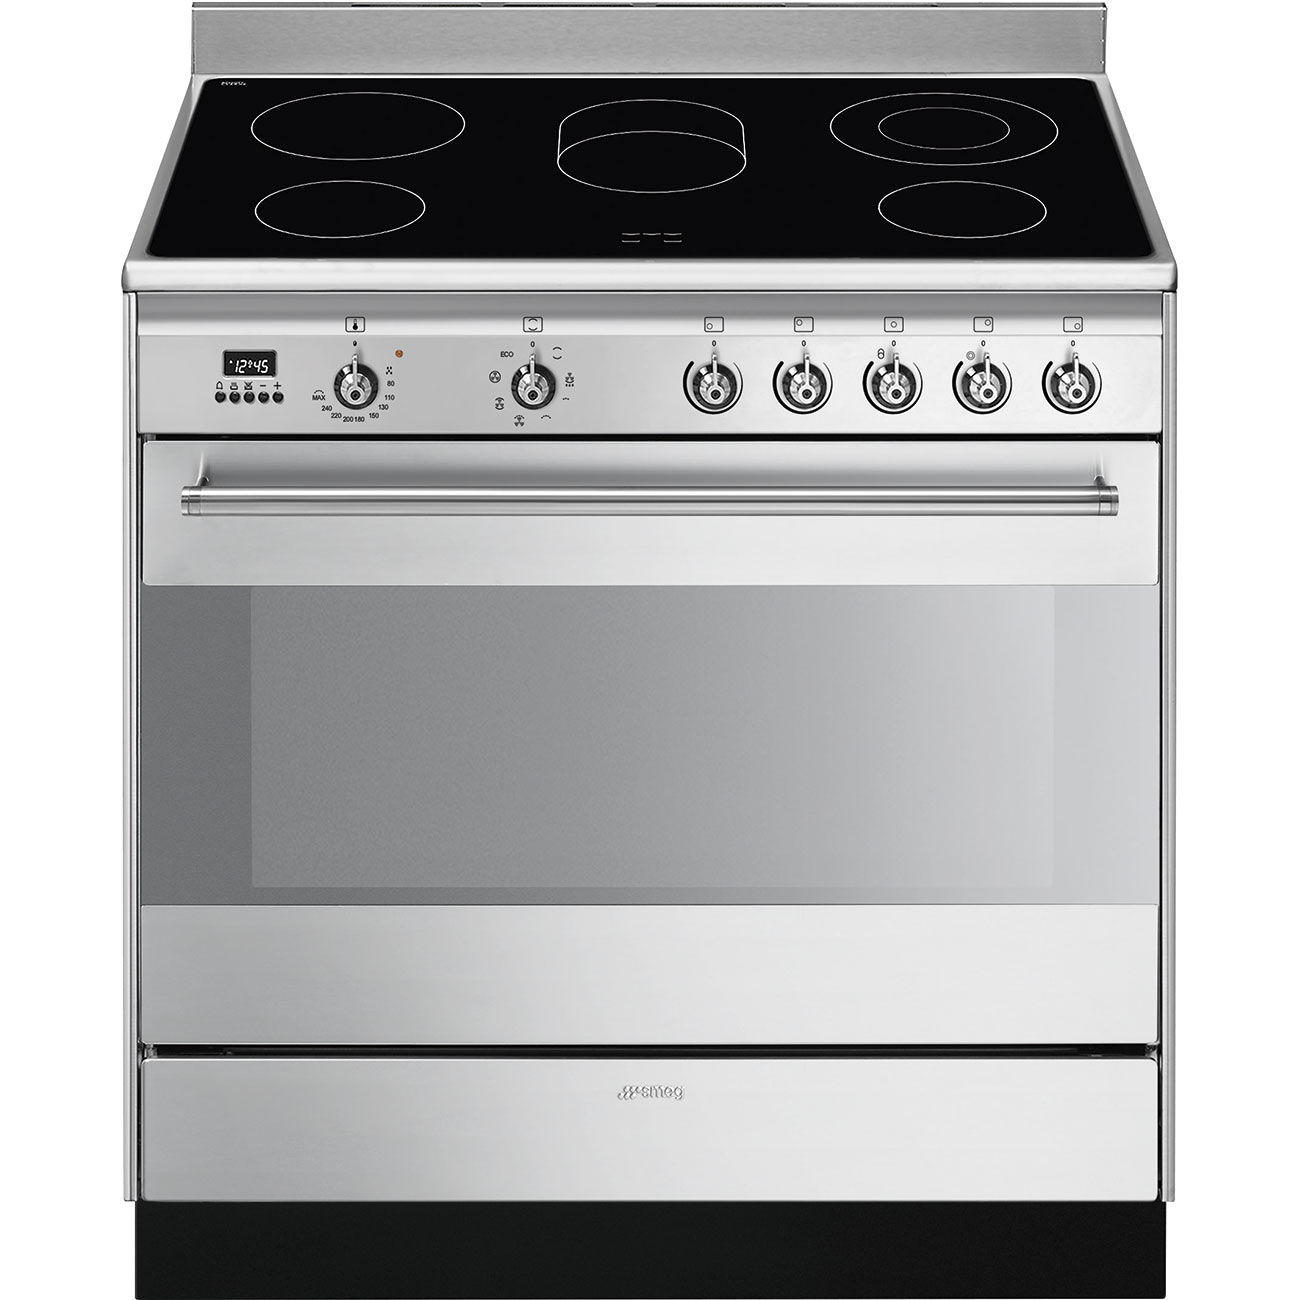 Smeg Stainless steel Cooker with Ceramic Hob_1